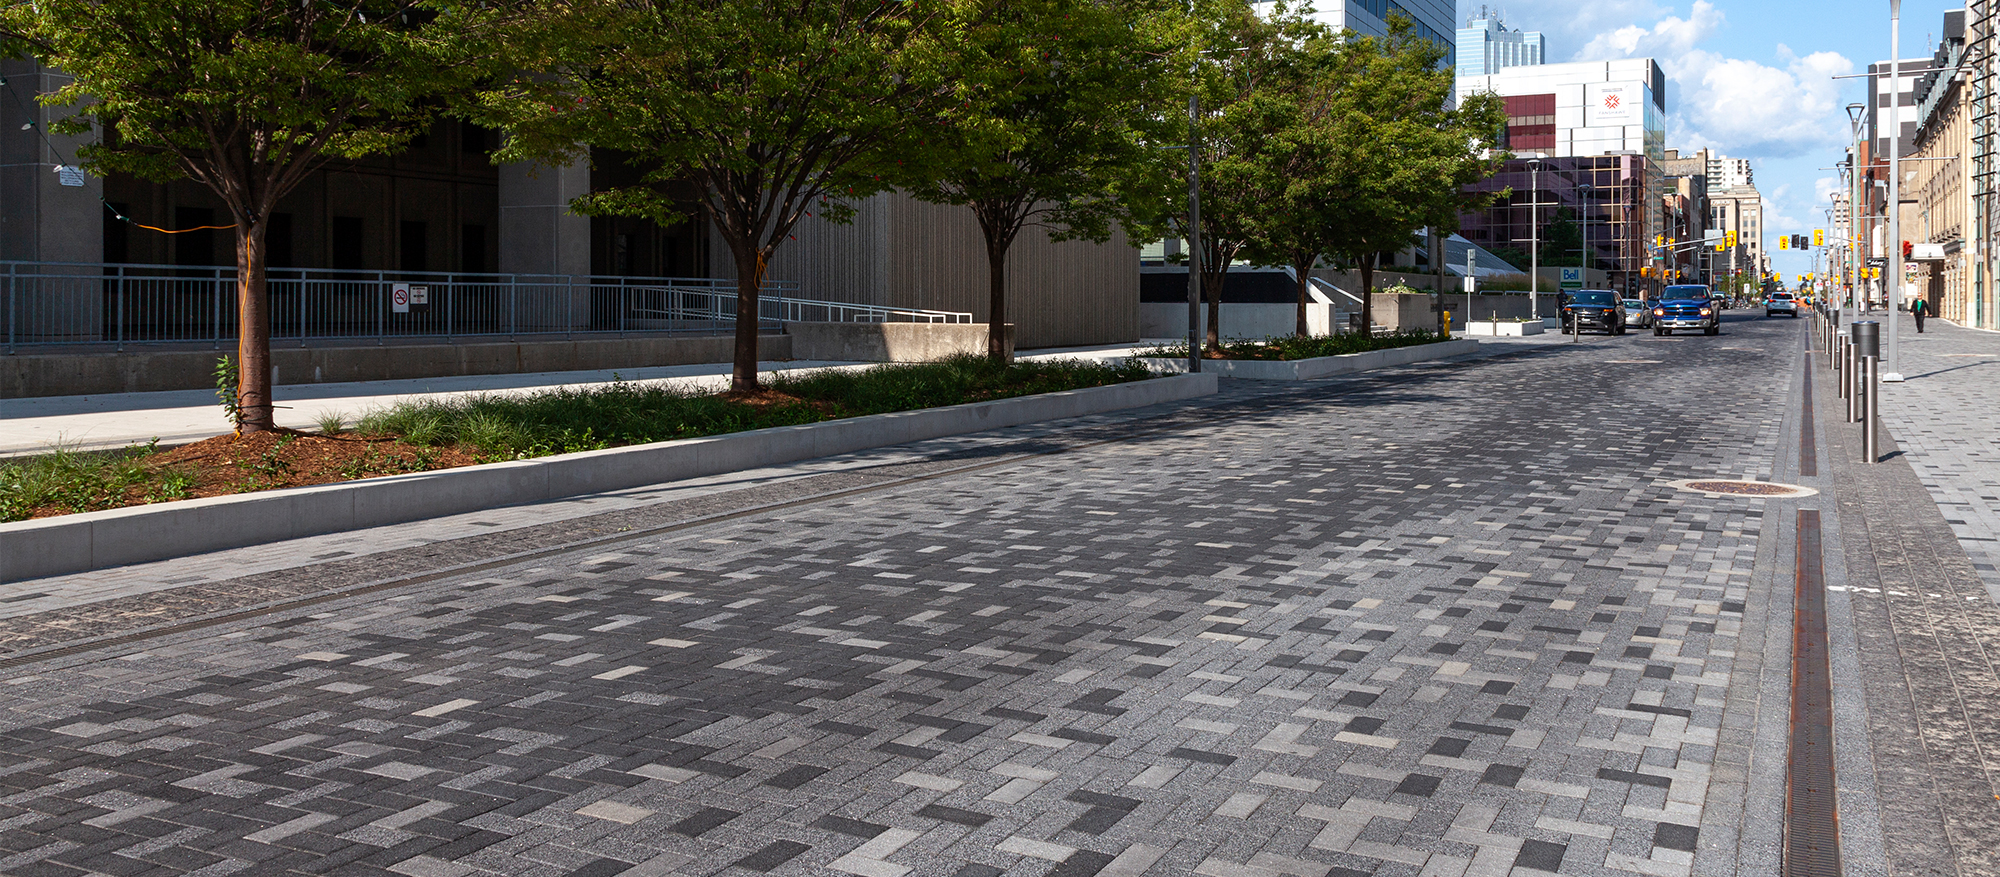 Dundas Place streetscape features Series pavers in pixelated patterns, a curvy zig-zag in the center, and landscaping.